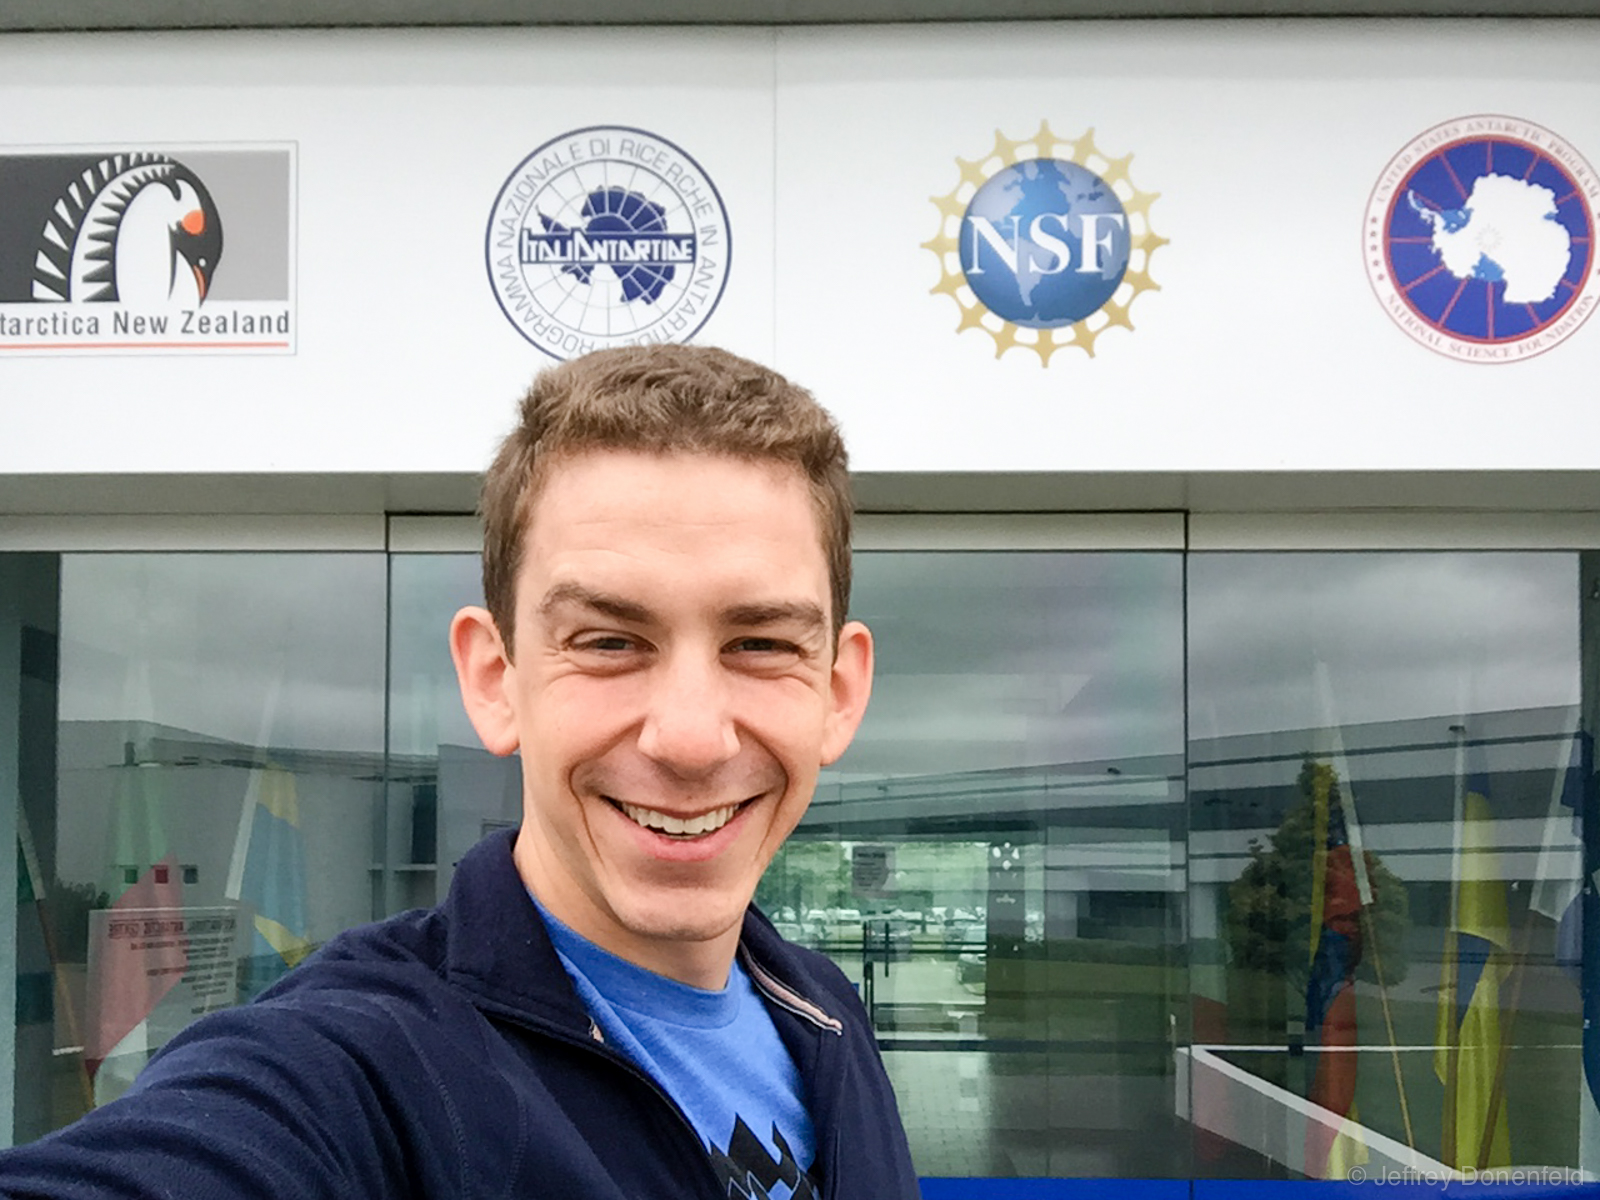 Exploring the offices of the International Antarctic Centre